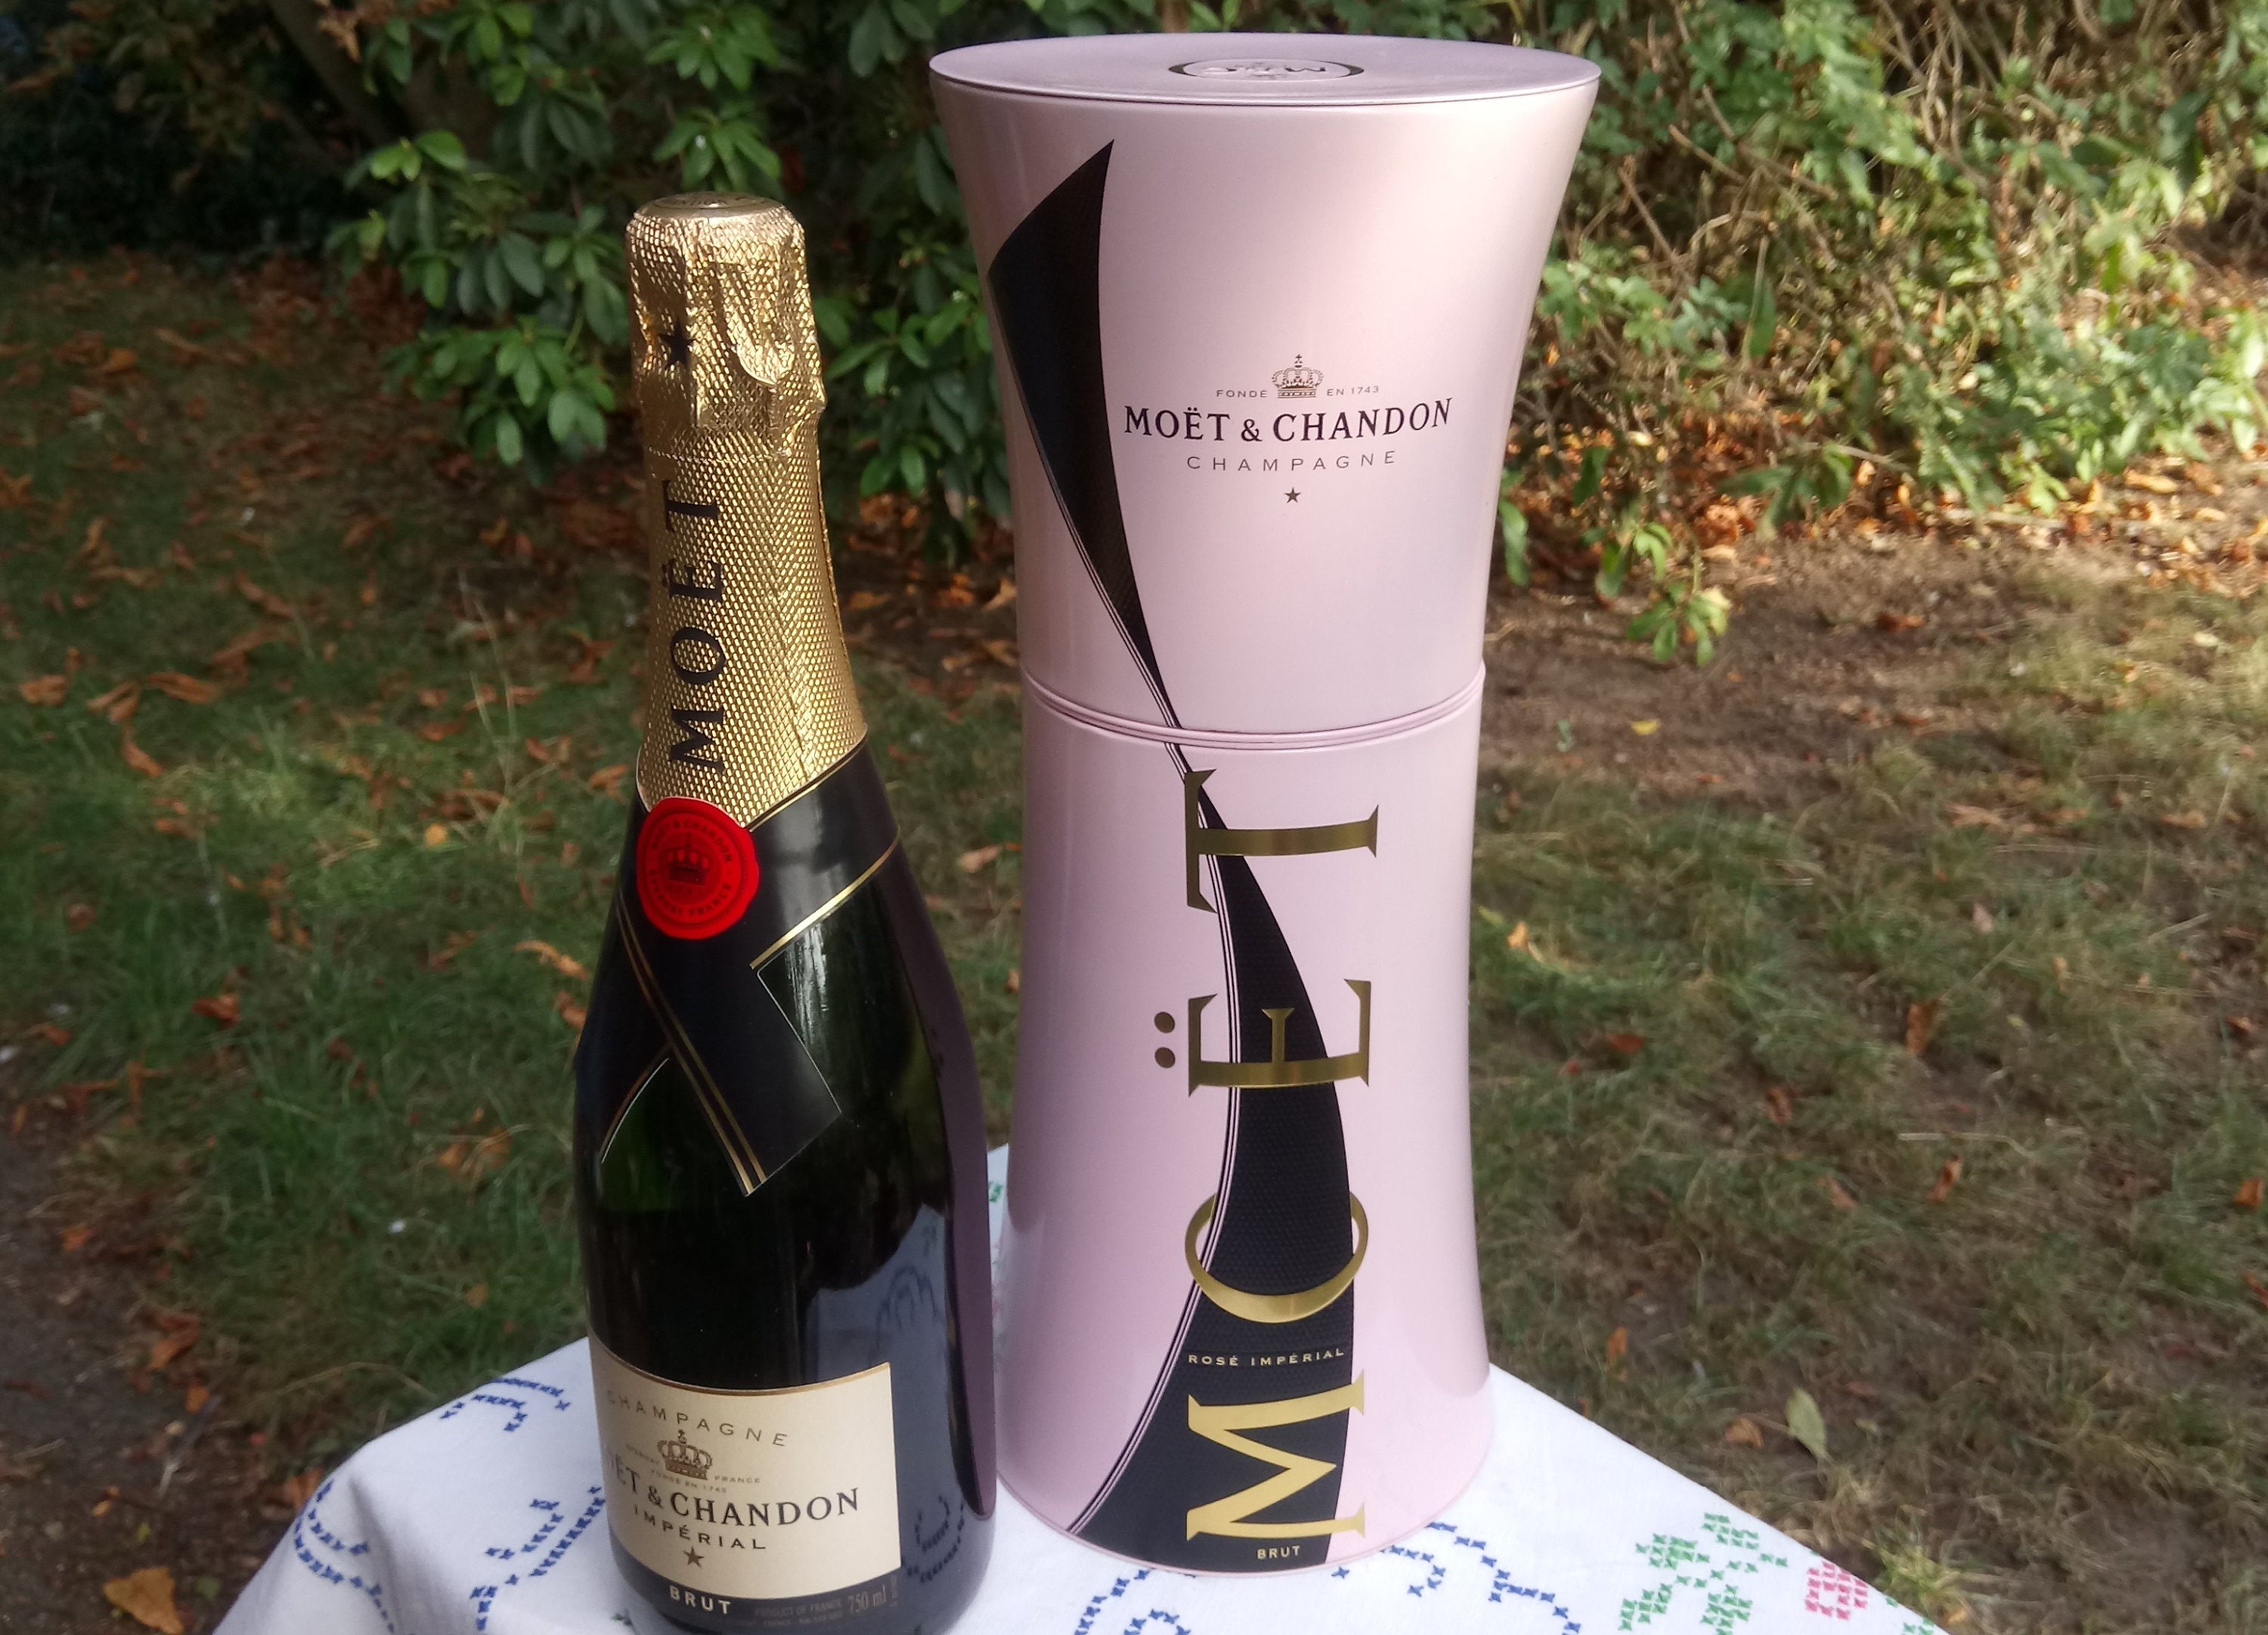 Moet & Chandon Rose Imperial (6 x 187ml Mini Bottles with Pink Sippers)